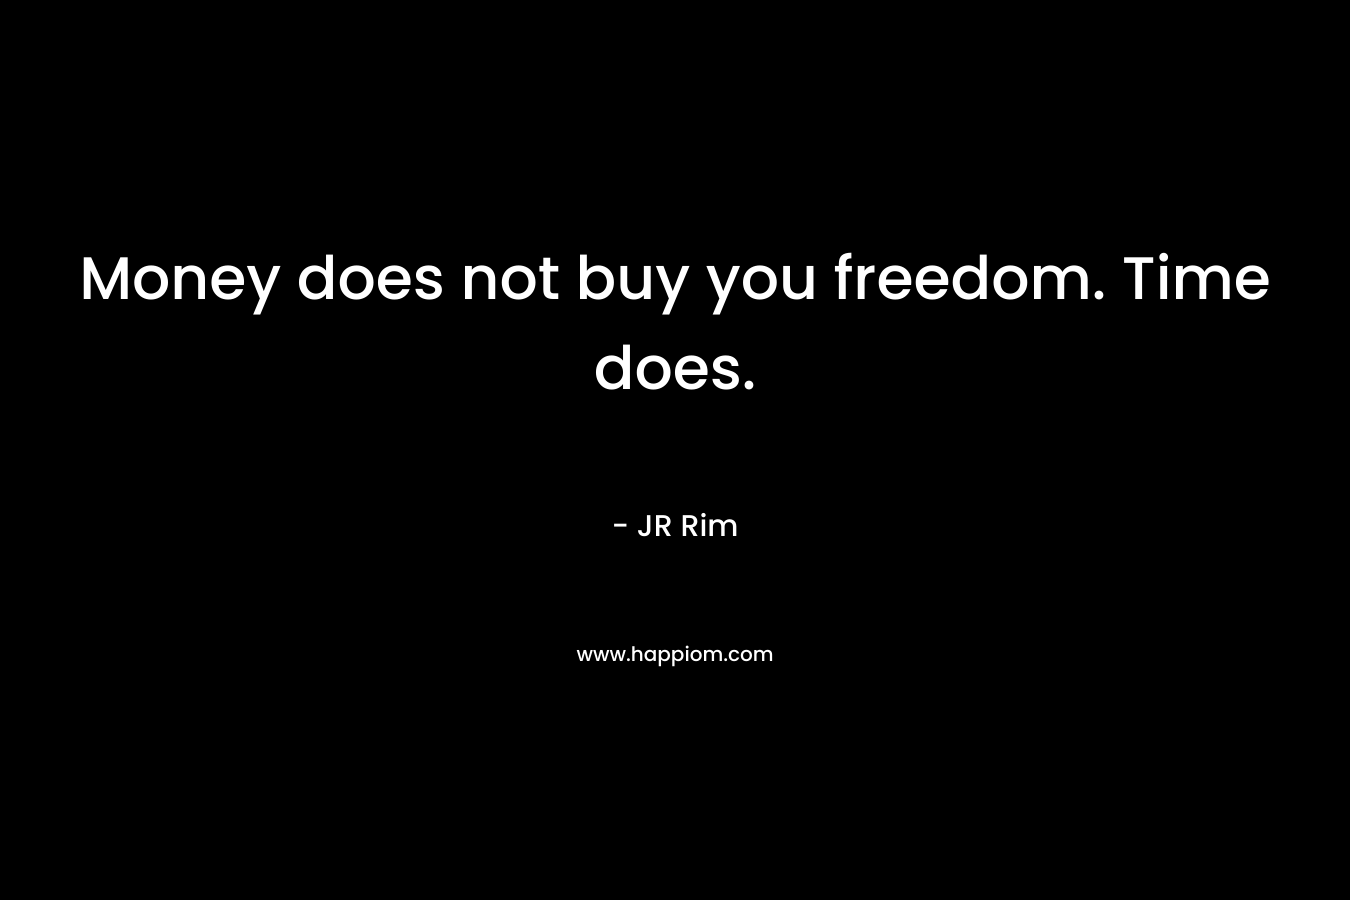 Money does not buy you freedom. Time does.